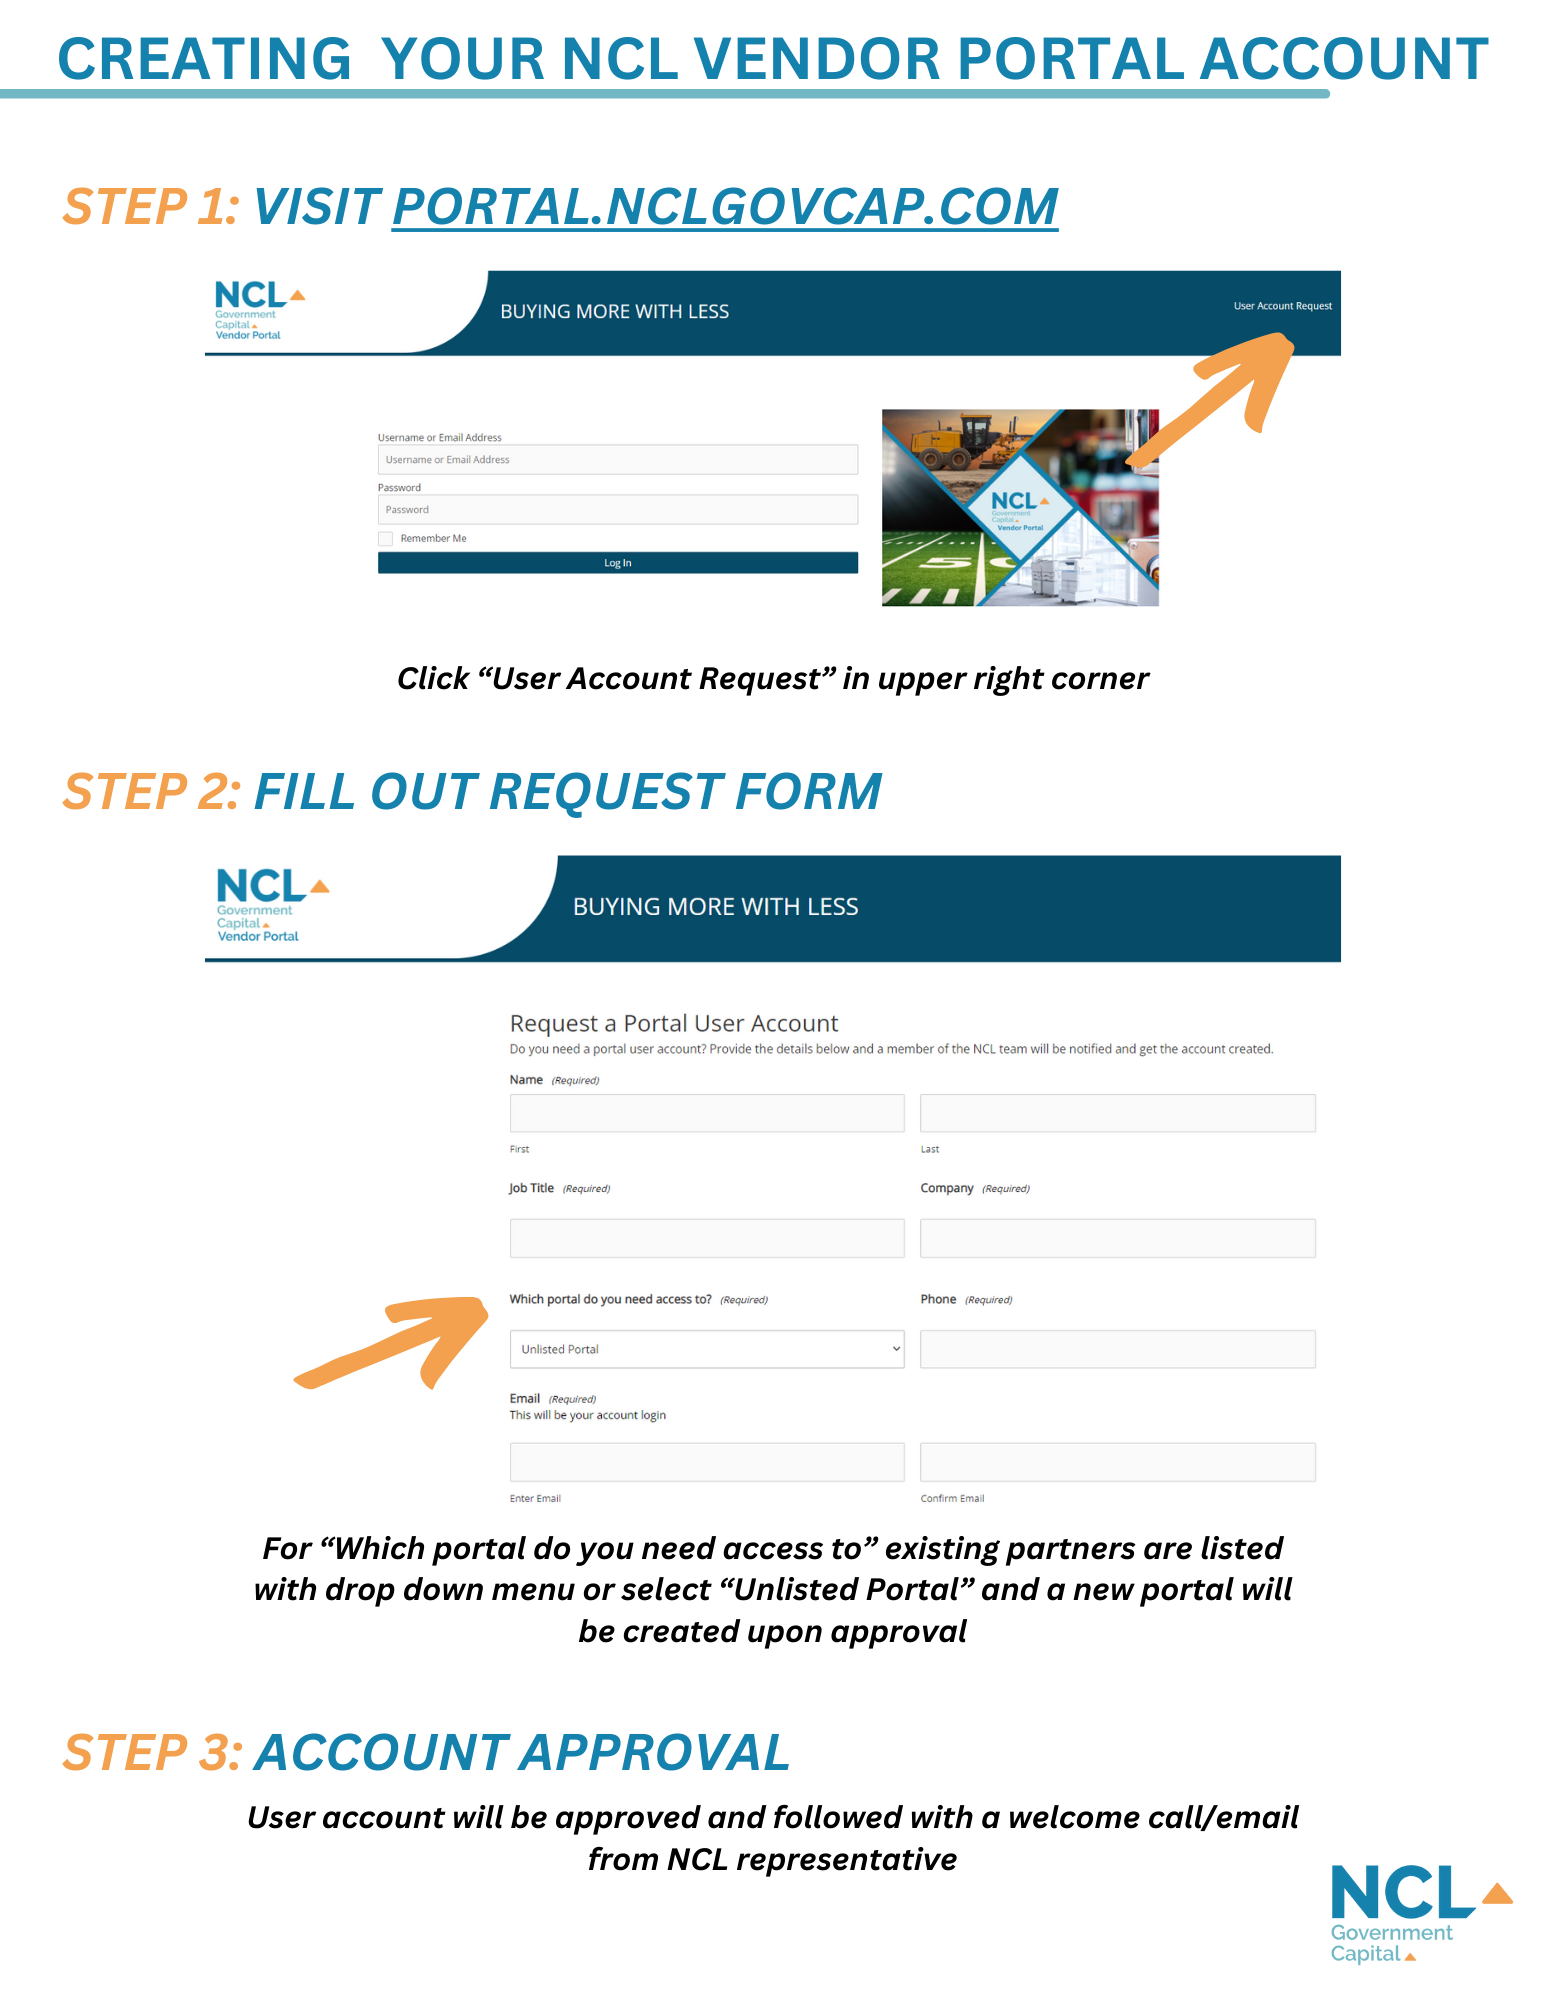 Creating Your NCL Portal Account